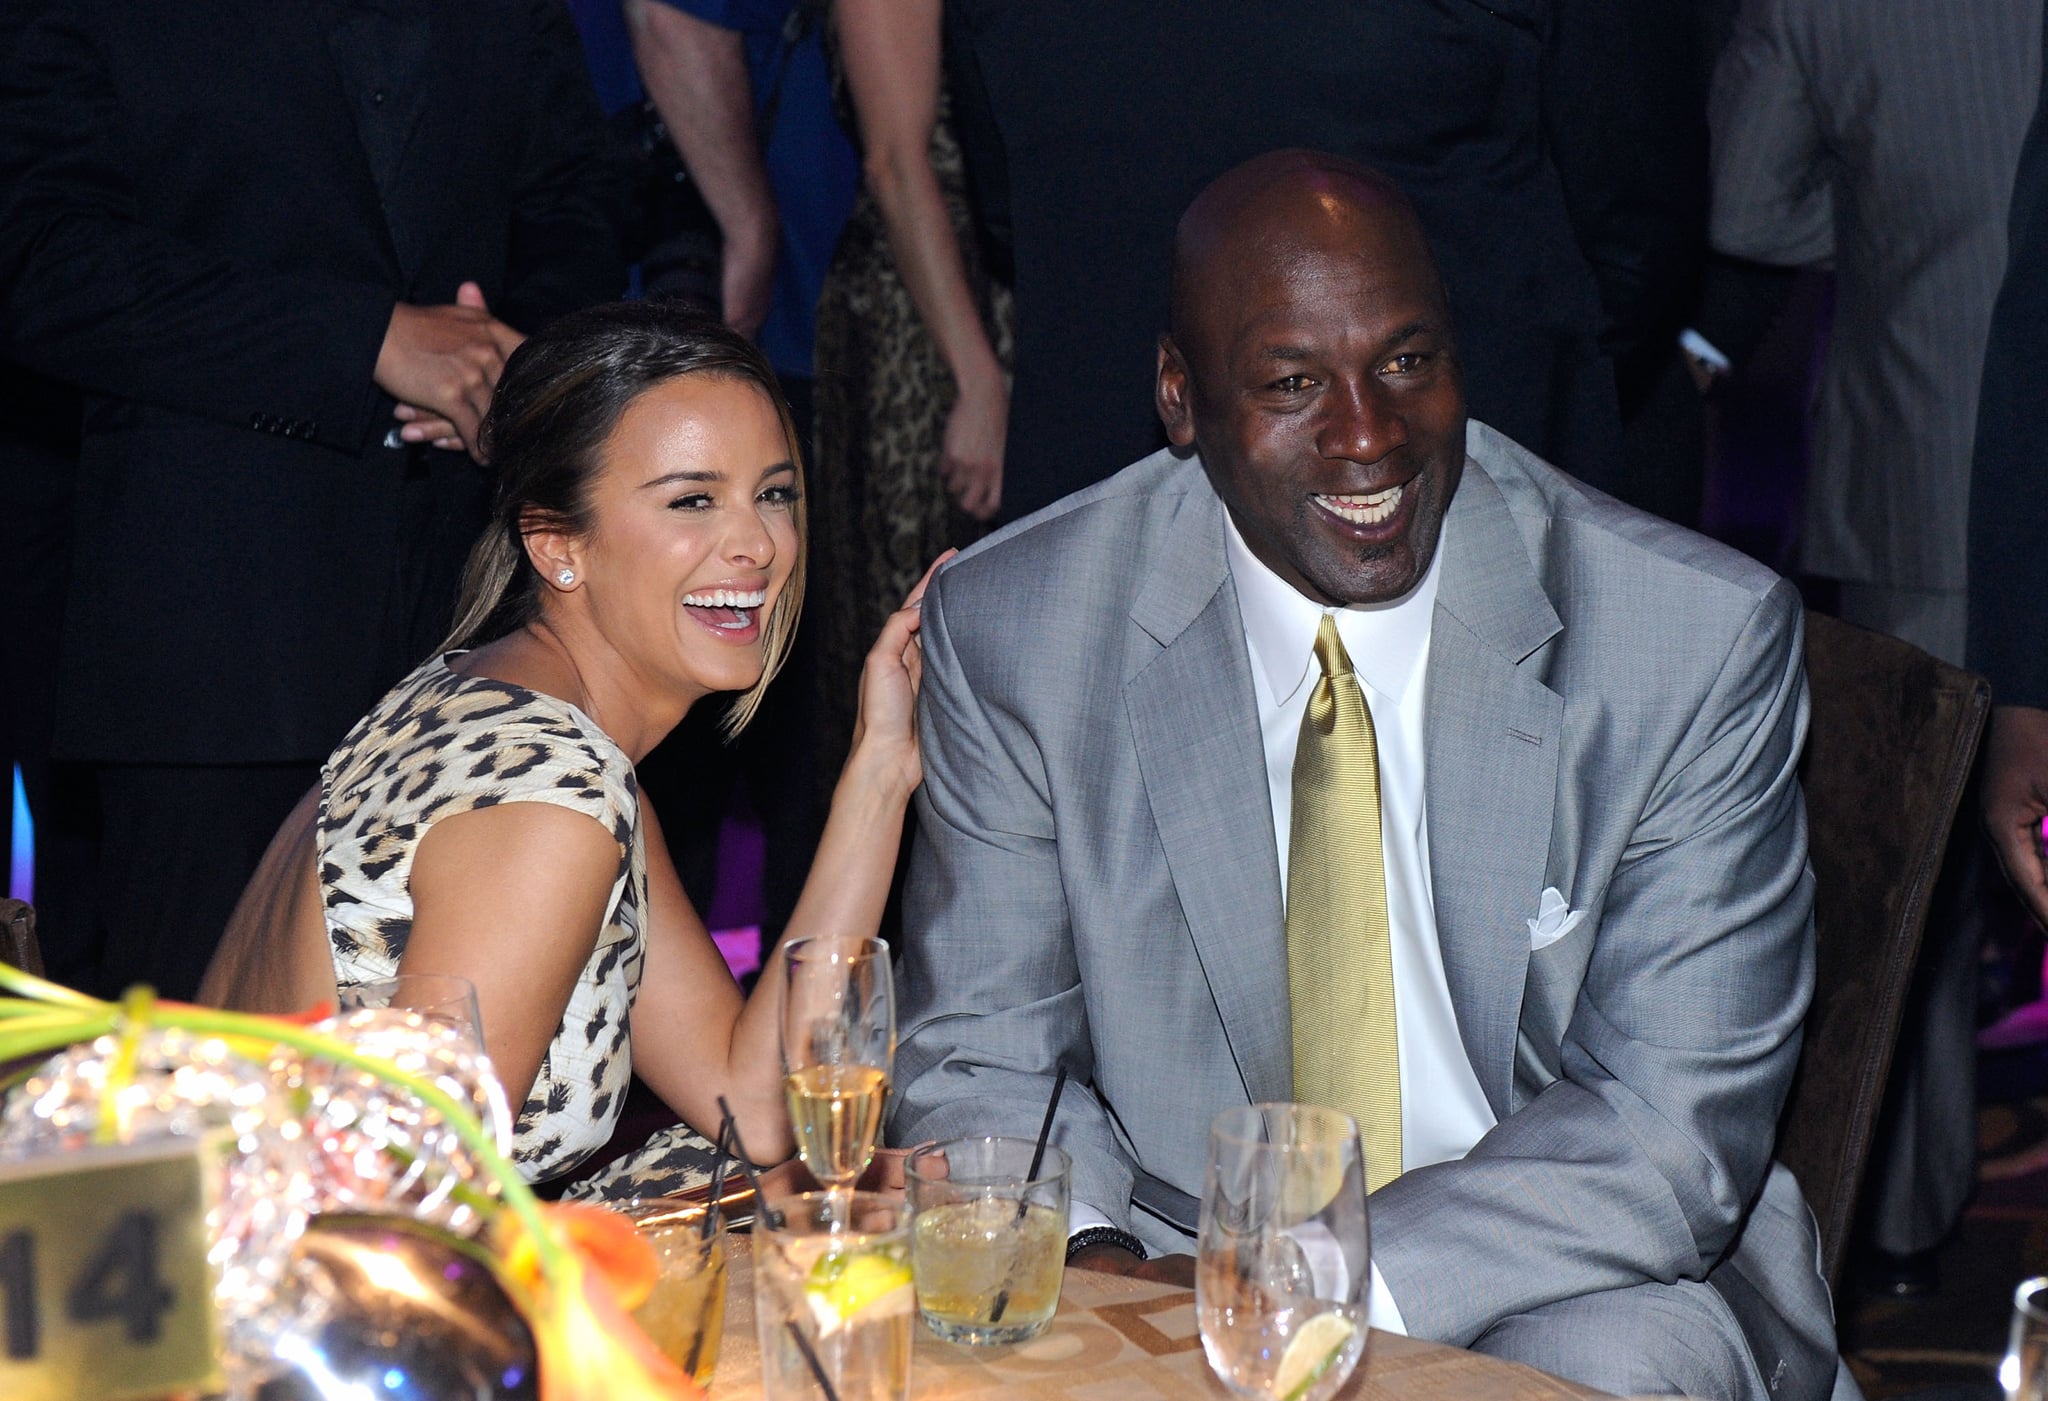 LAS VEGAS, NV - MARCH 30:  Charlotte Bobcats owner Michael Jordan (R) and fiancee Yvette Prieto attend the 11th annual Michael Jordan Celebrity Invitational gala at the Aria Resort & Casino at CityCenter March 30, 2011 in Las Vegas, Nevada.  (Photo by Ethan Miller/Getty Images for MJCI)